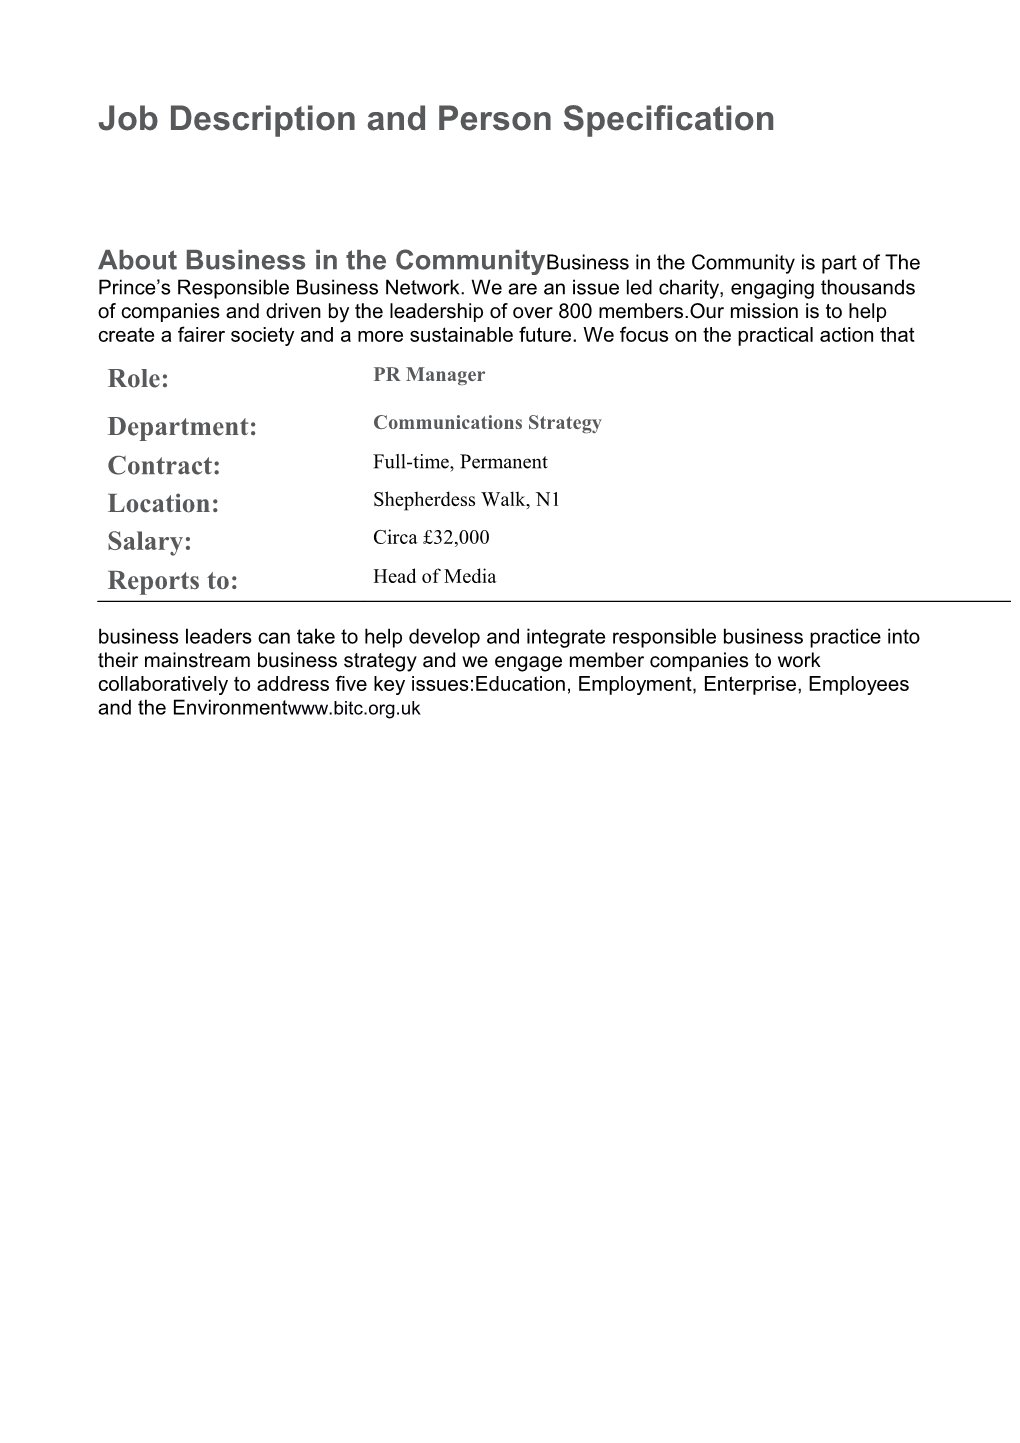 About Business in the Community s1